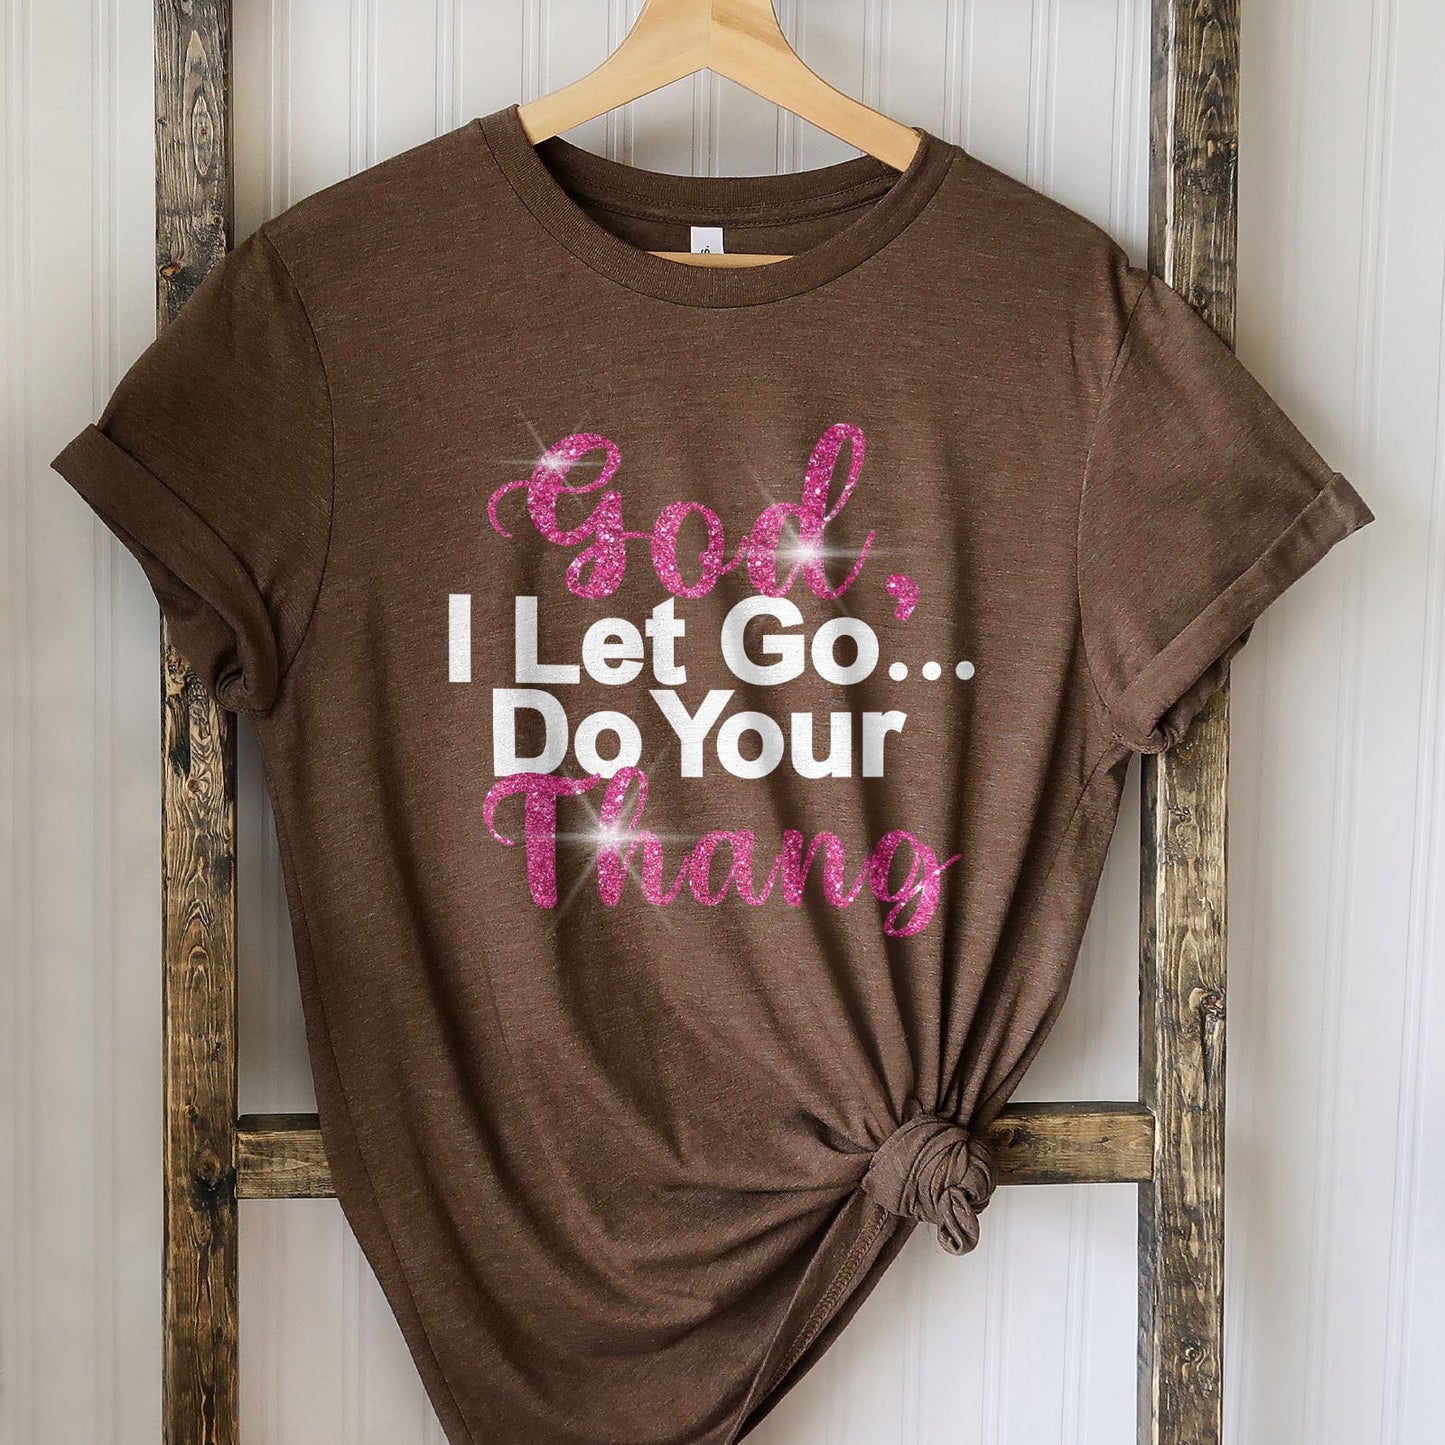 God Do Your Thang Tee Shirts For Women - Christian Shirts for Women - Religious Tee Shirts